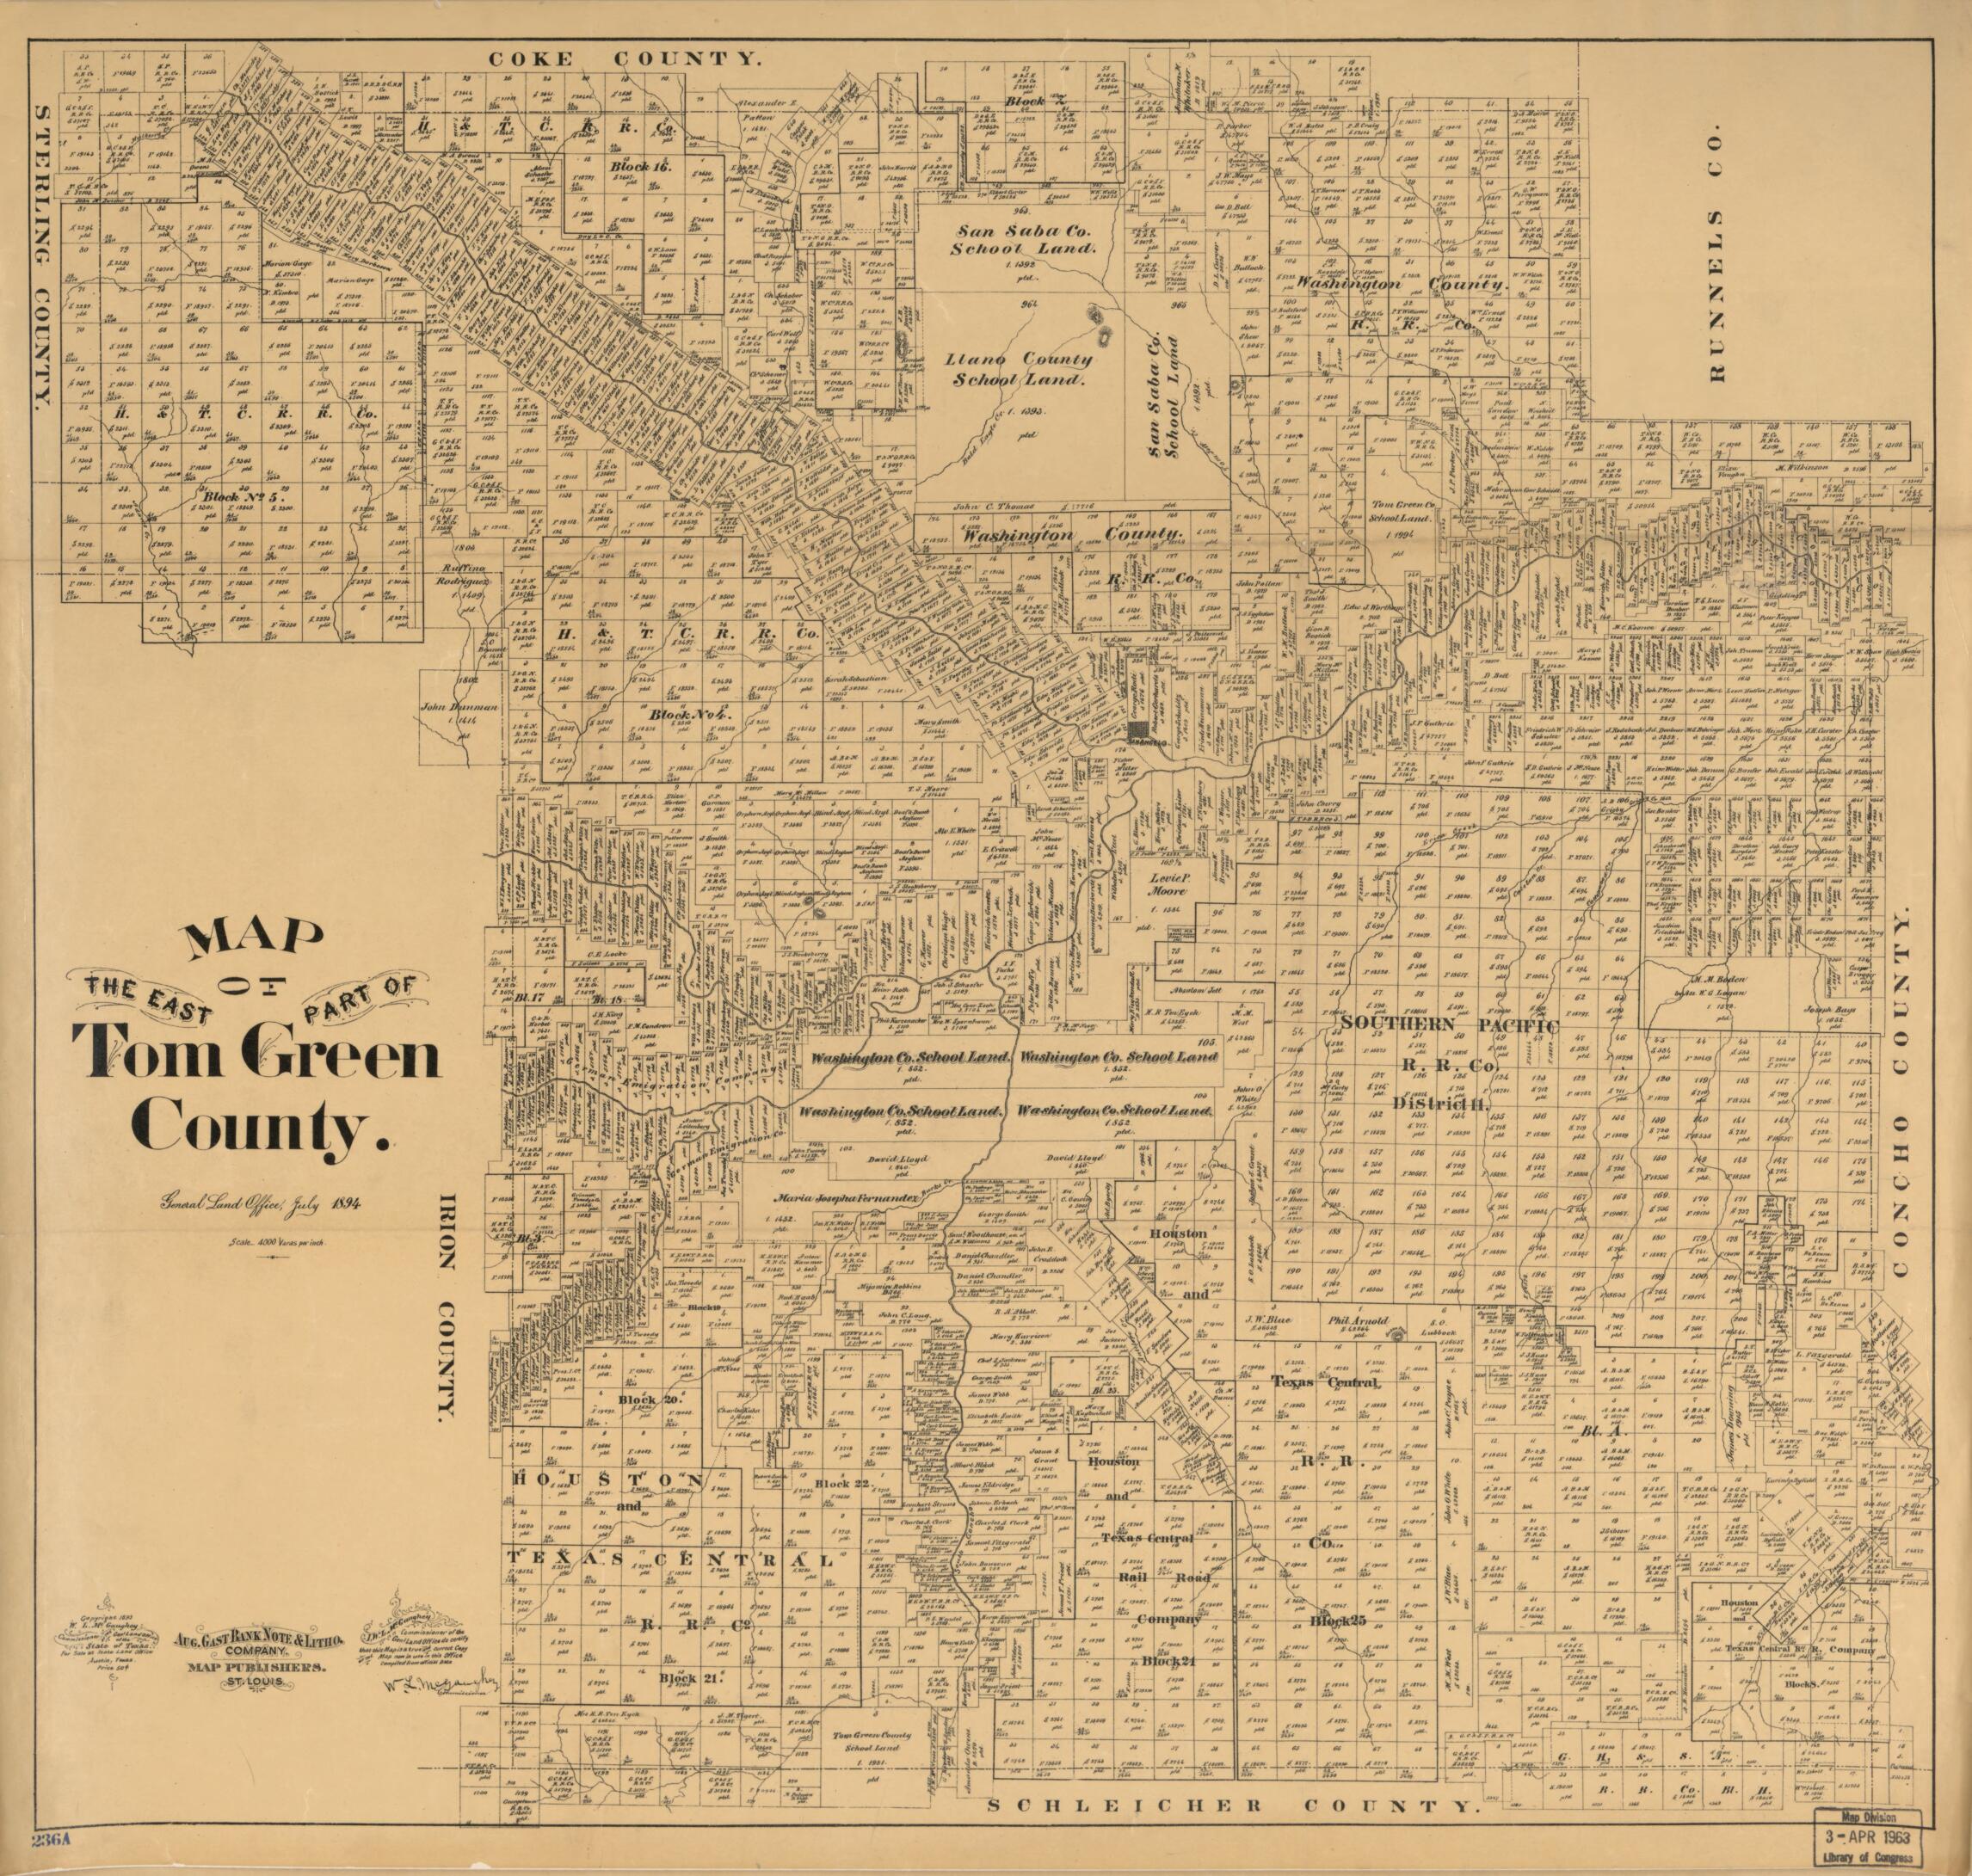 This old map of Map of the East Part of Tom Green County from 1894 was created by W. L. McGaughey,  Texas. General Land Office in 1894